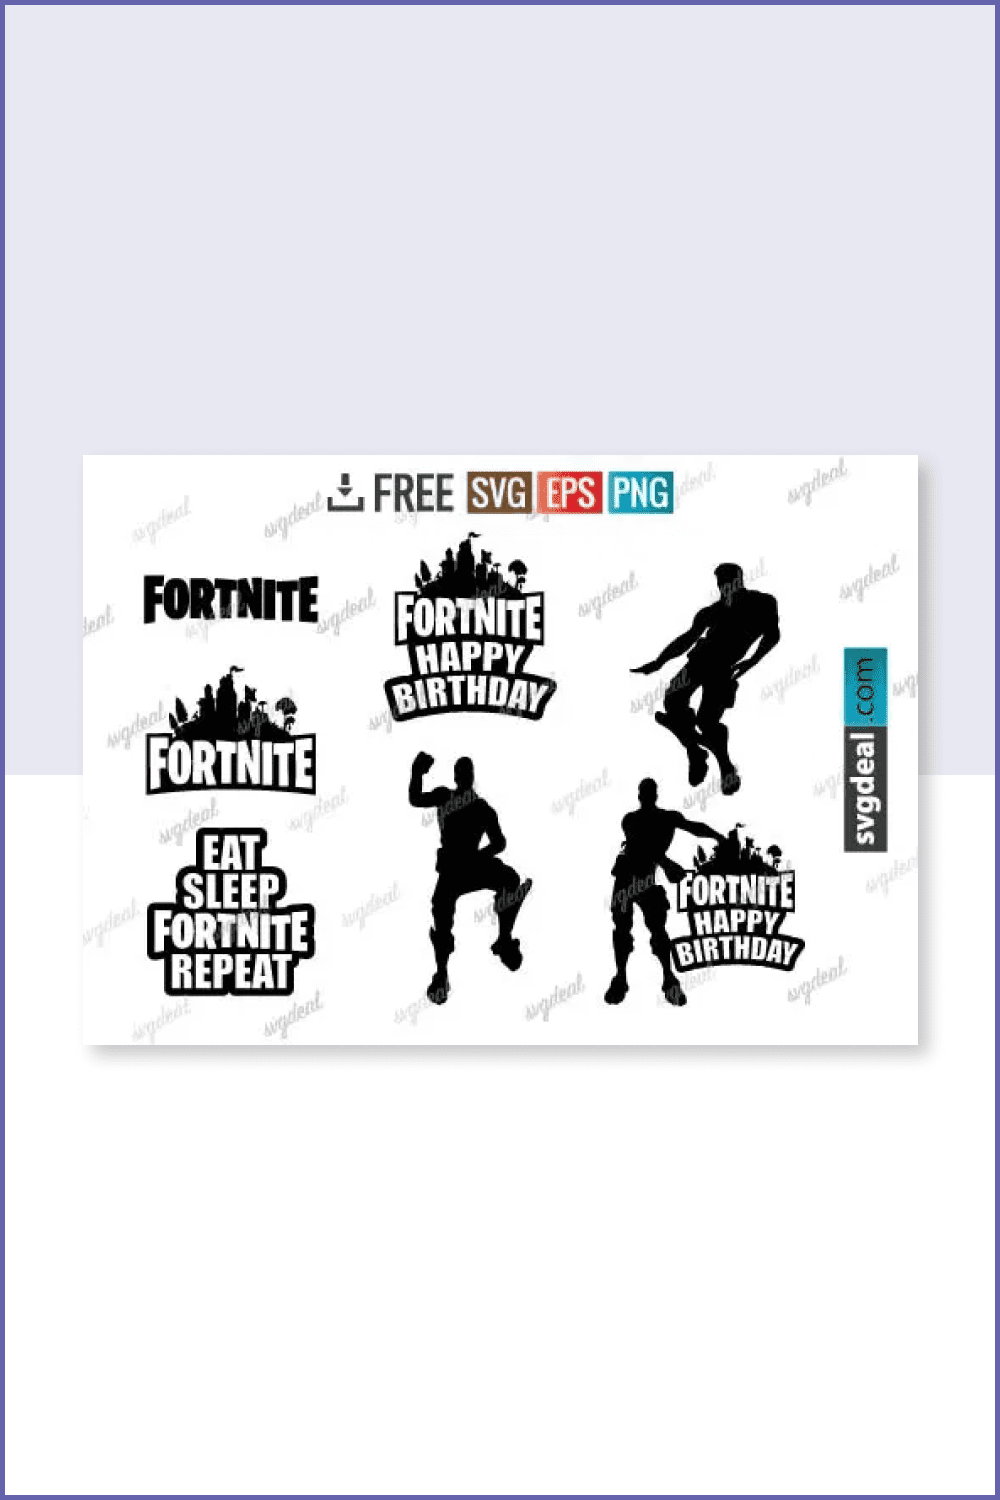 Stickers with text and silhouettes of gamers.